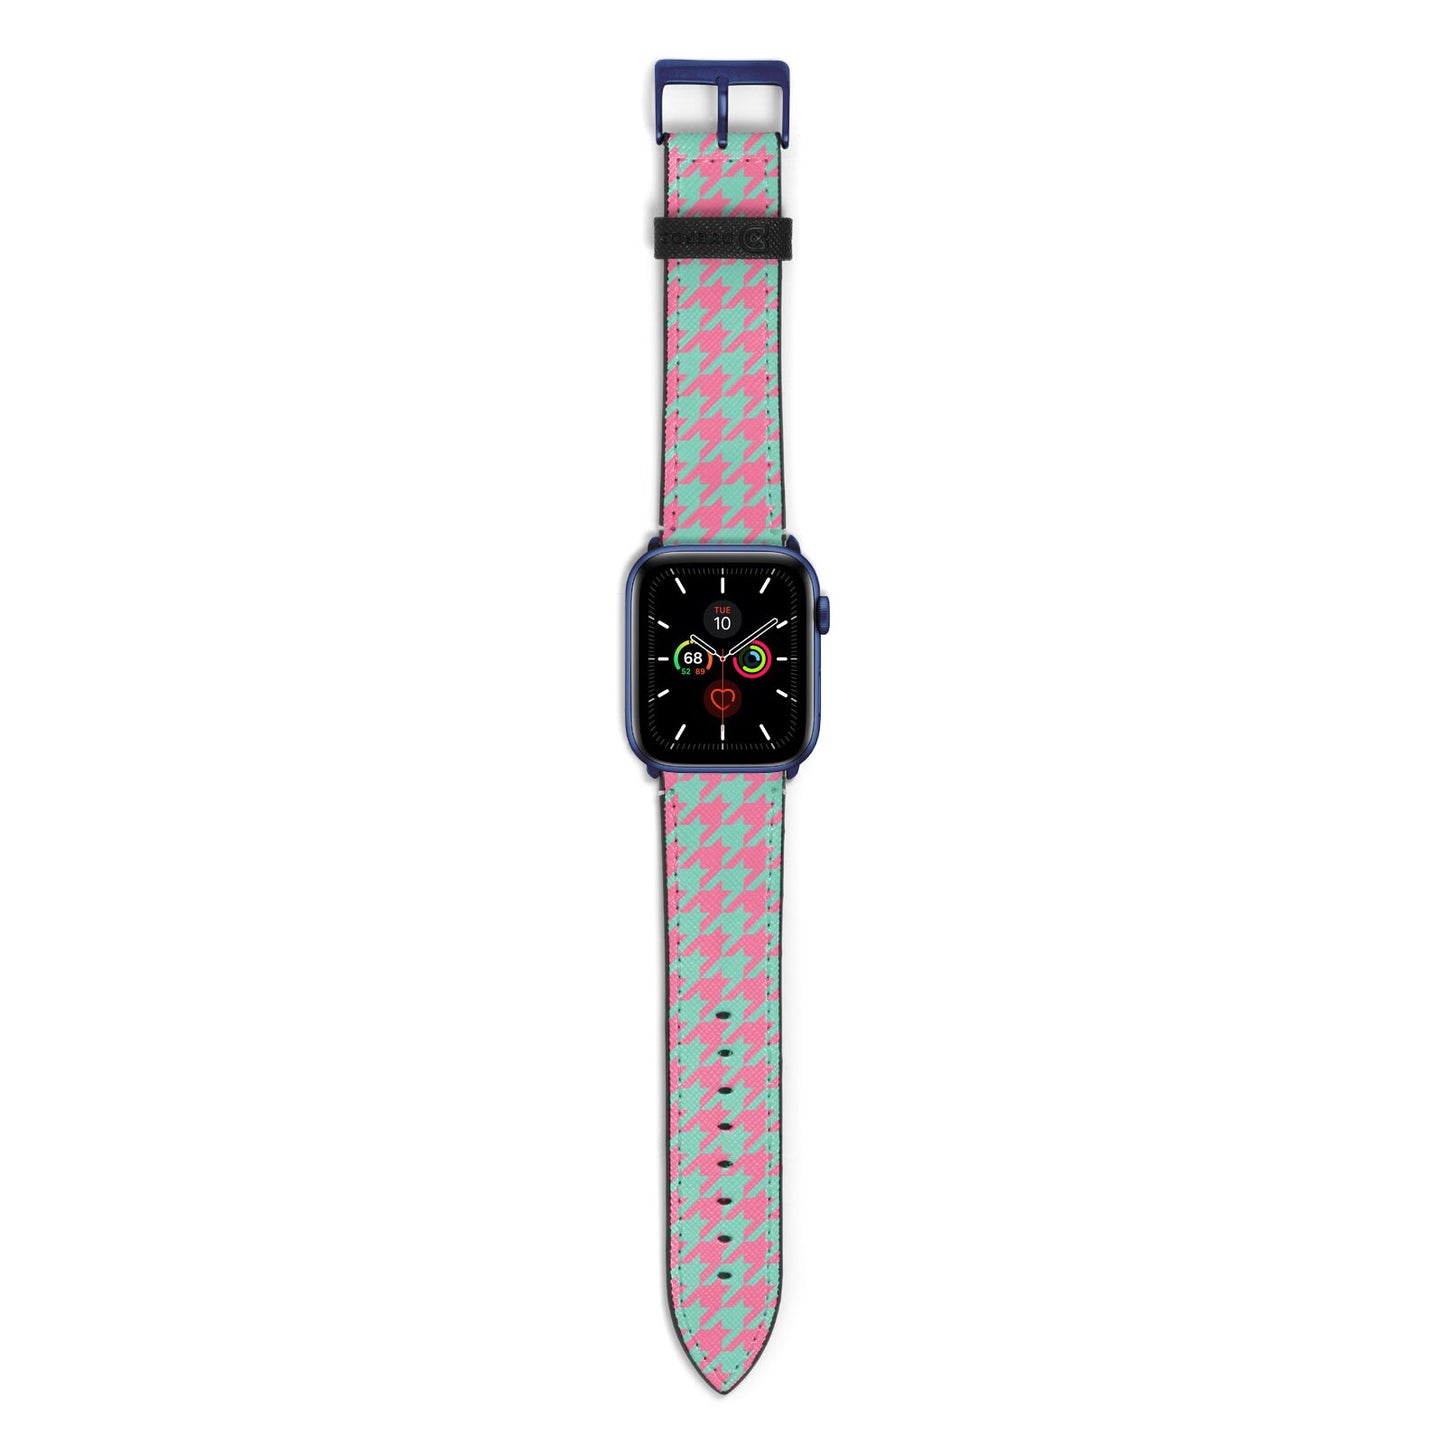 Pink Houndstooth Apple Watch Strap with Blue Hardware